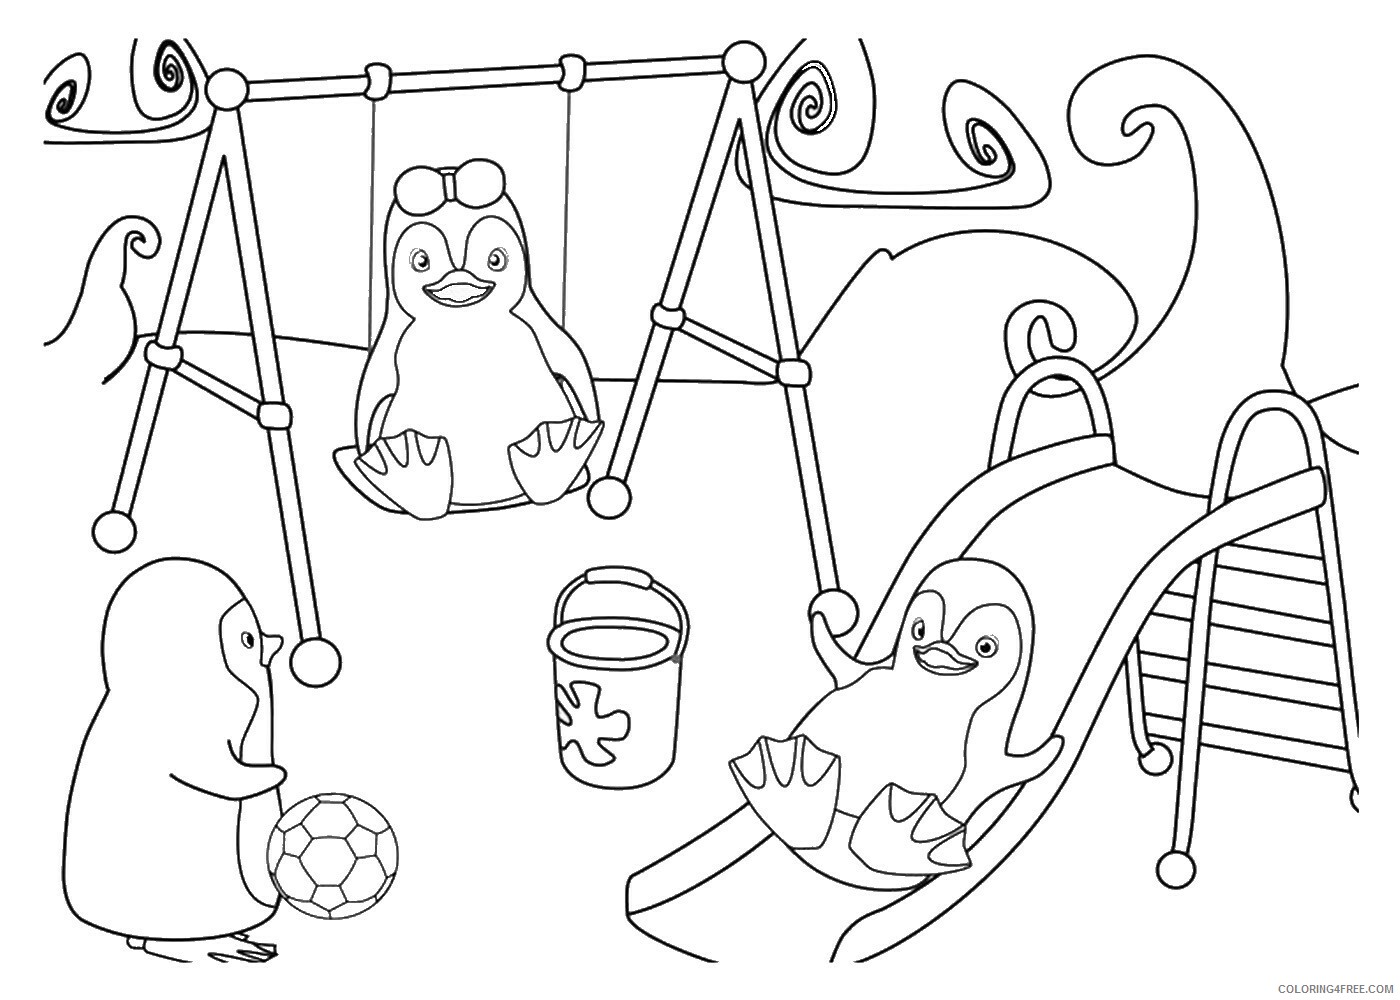 Ozie Boo Coloring Pages TV Film Ozie_Boo_cl_12 Printable 2020 05864 Coloring4free